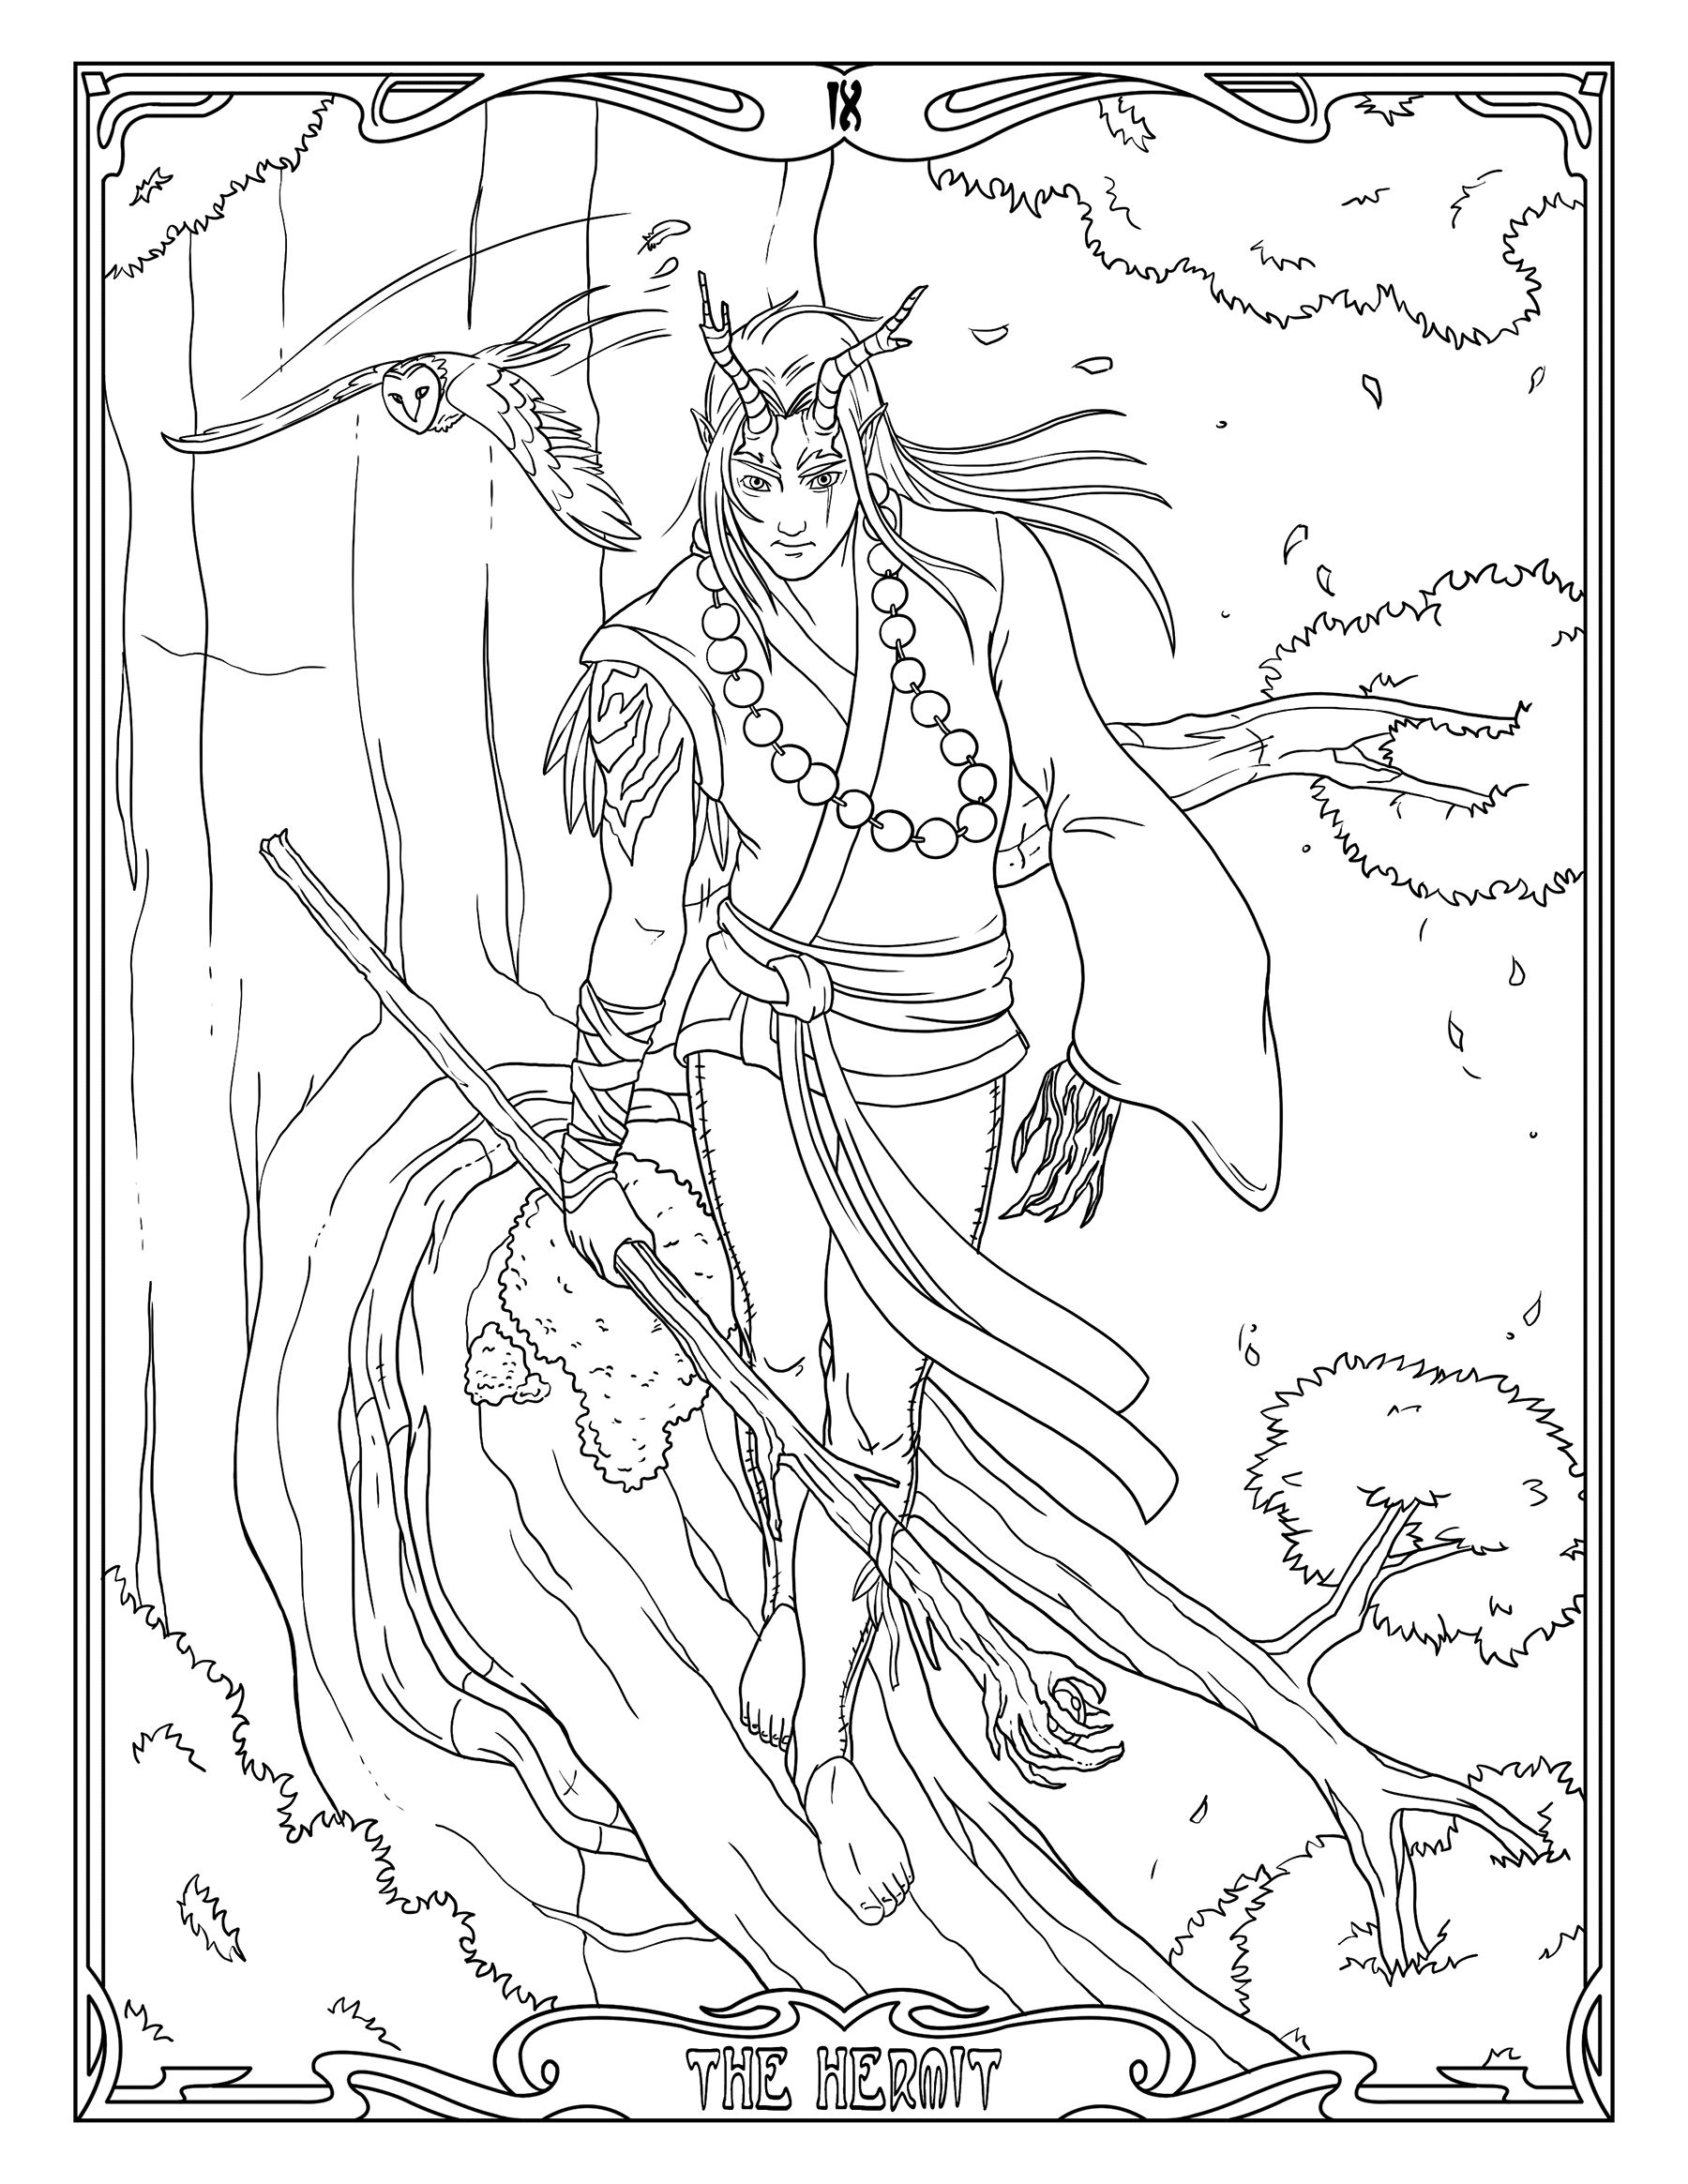 Free Tarot Card Coloring Pages at GetColorings.com | Free printable